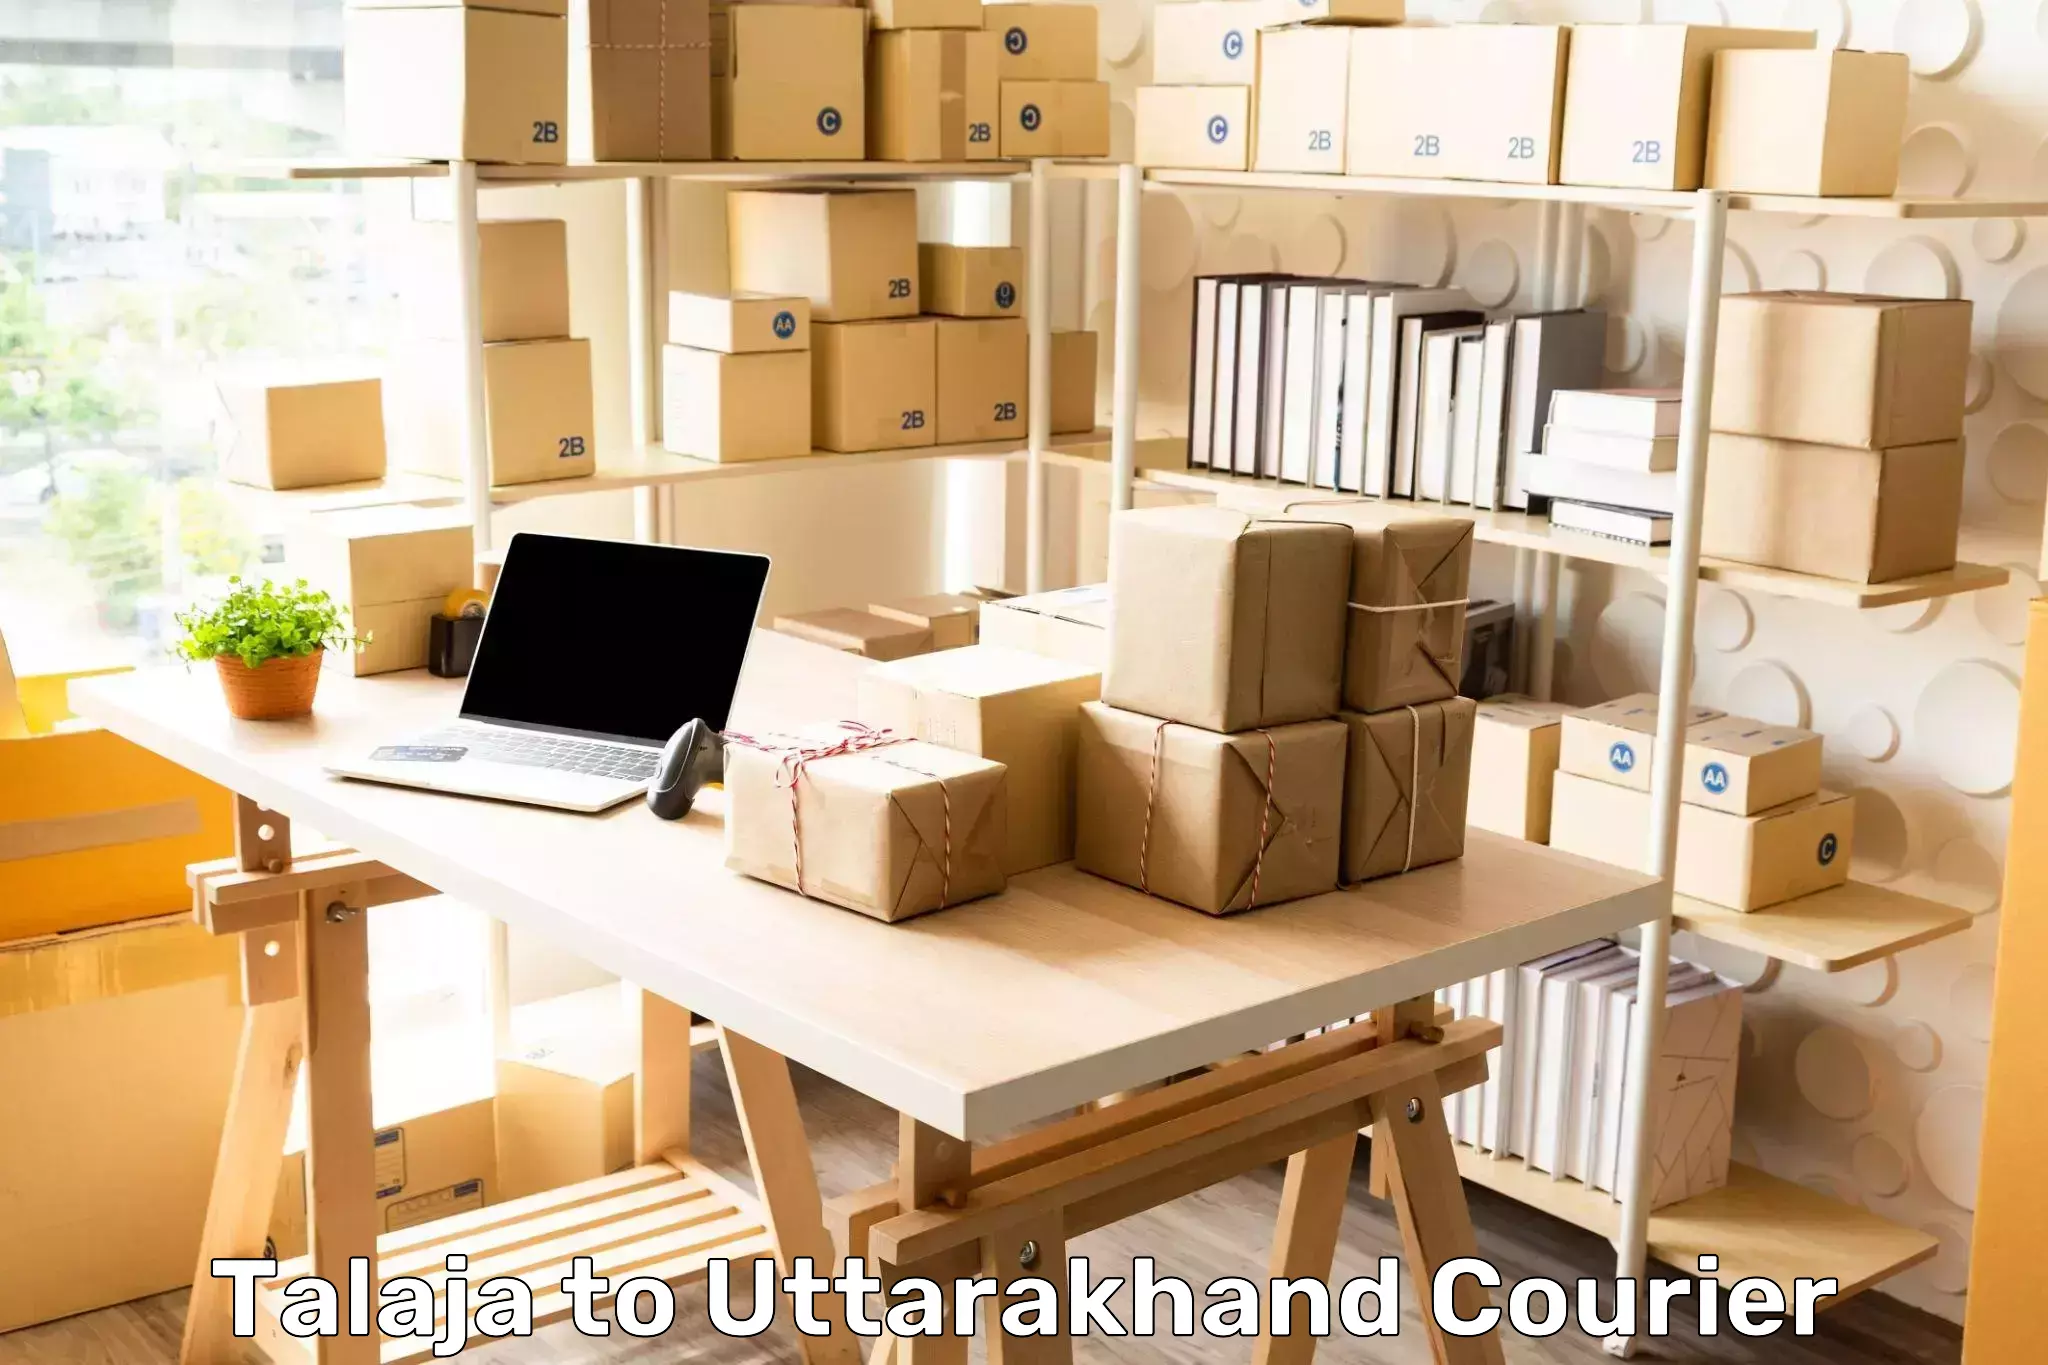 Nationwide parcel services Talaja to Rishikesh